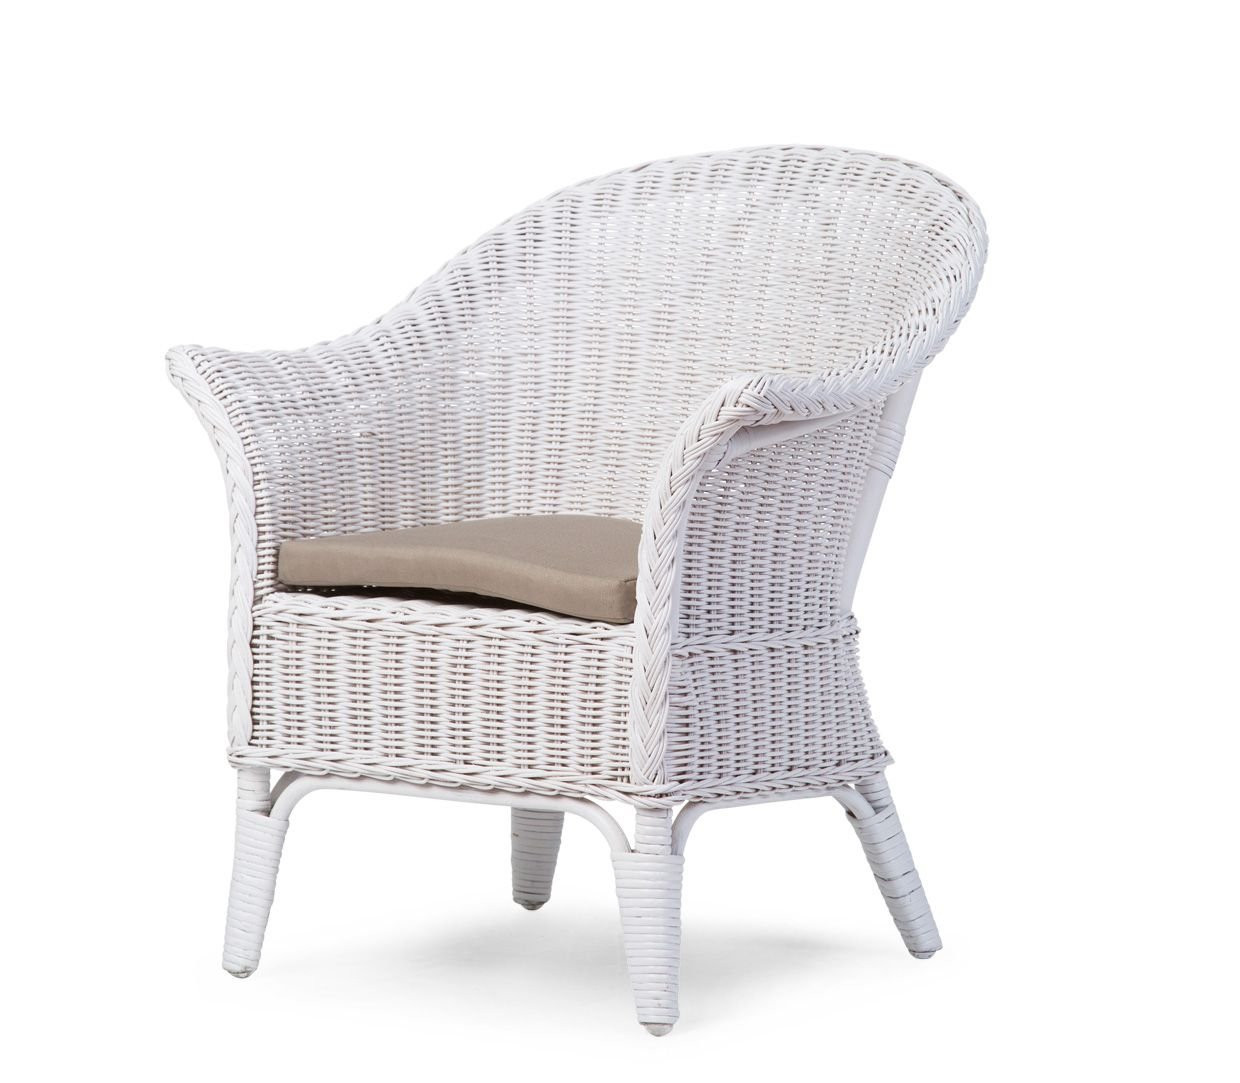 Kids Wicker Chair
 Childhome Wicker Chair Mimo Weiss Buy at kidsroom